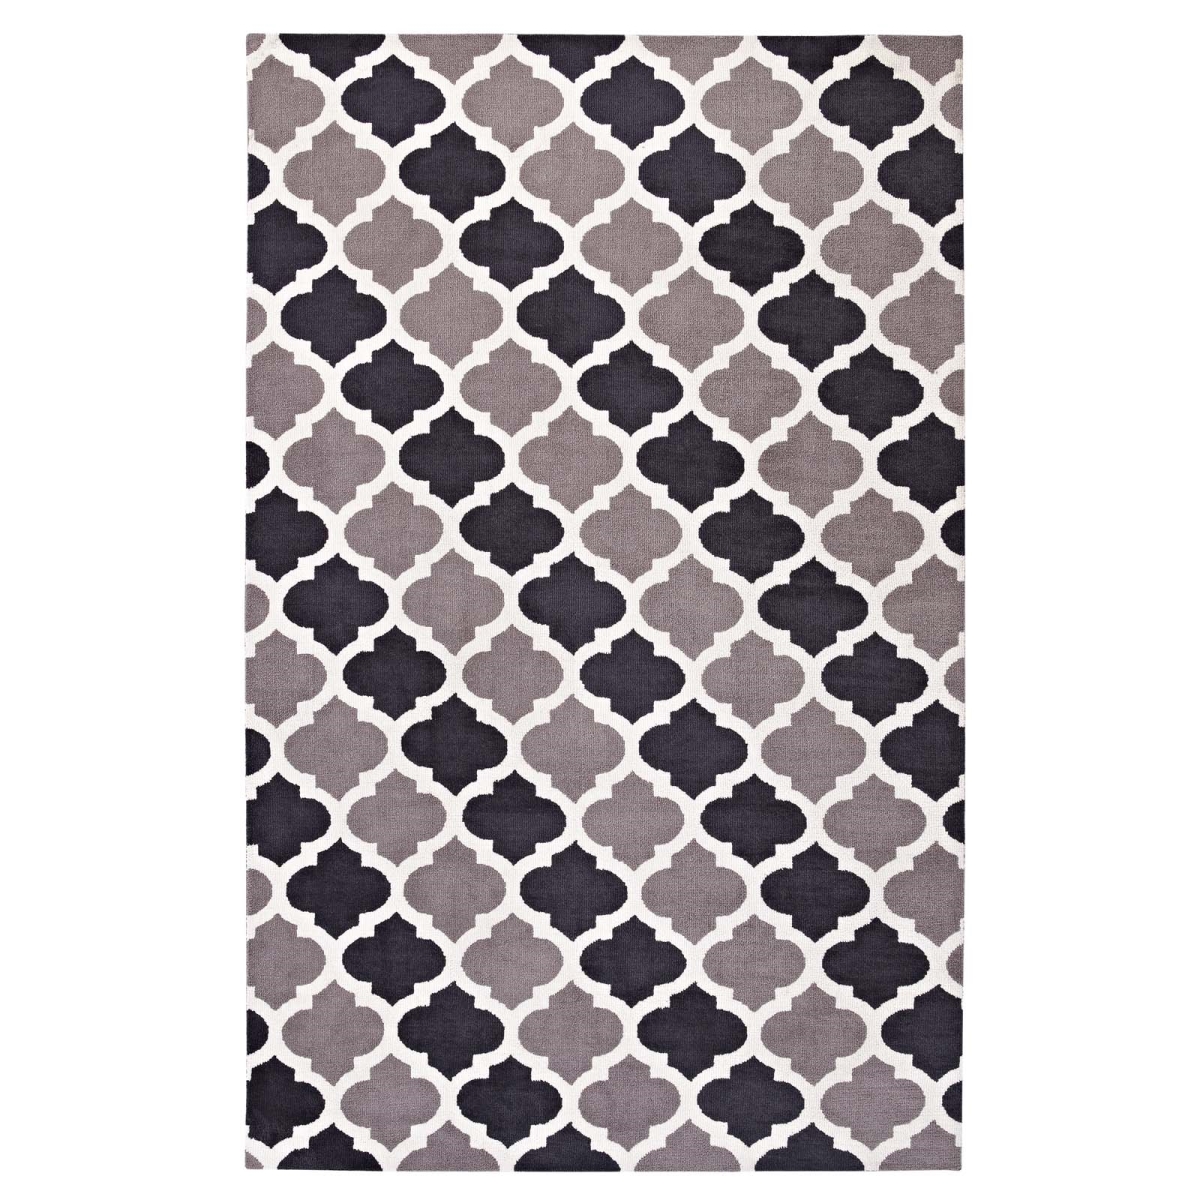 R-1001b-810 8 X 10 Ft. Lida Moroccan Trellis Polyester Area Rug - Charcoal & Black, 0.5 X 96 X 120 In.